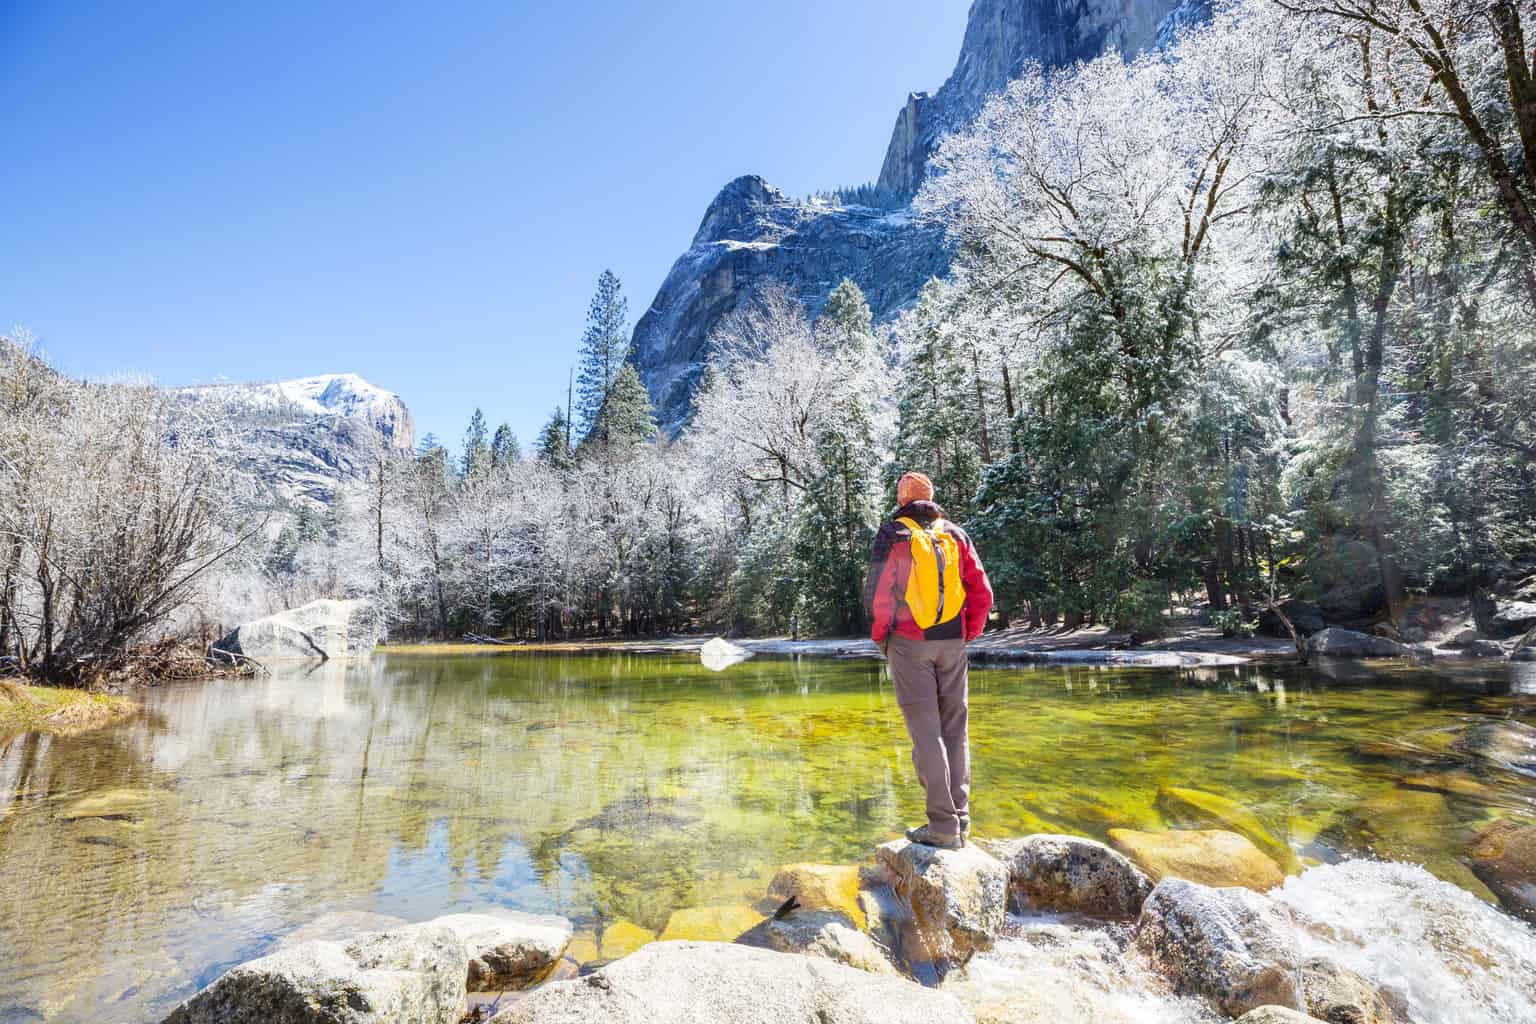 A man stands next to an alpine lake in Yosemite National Park in California.